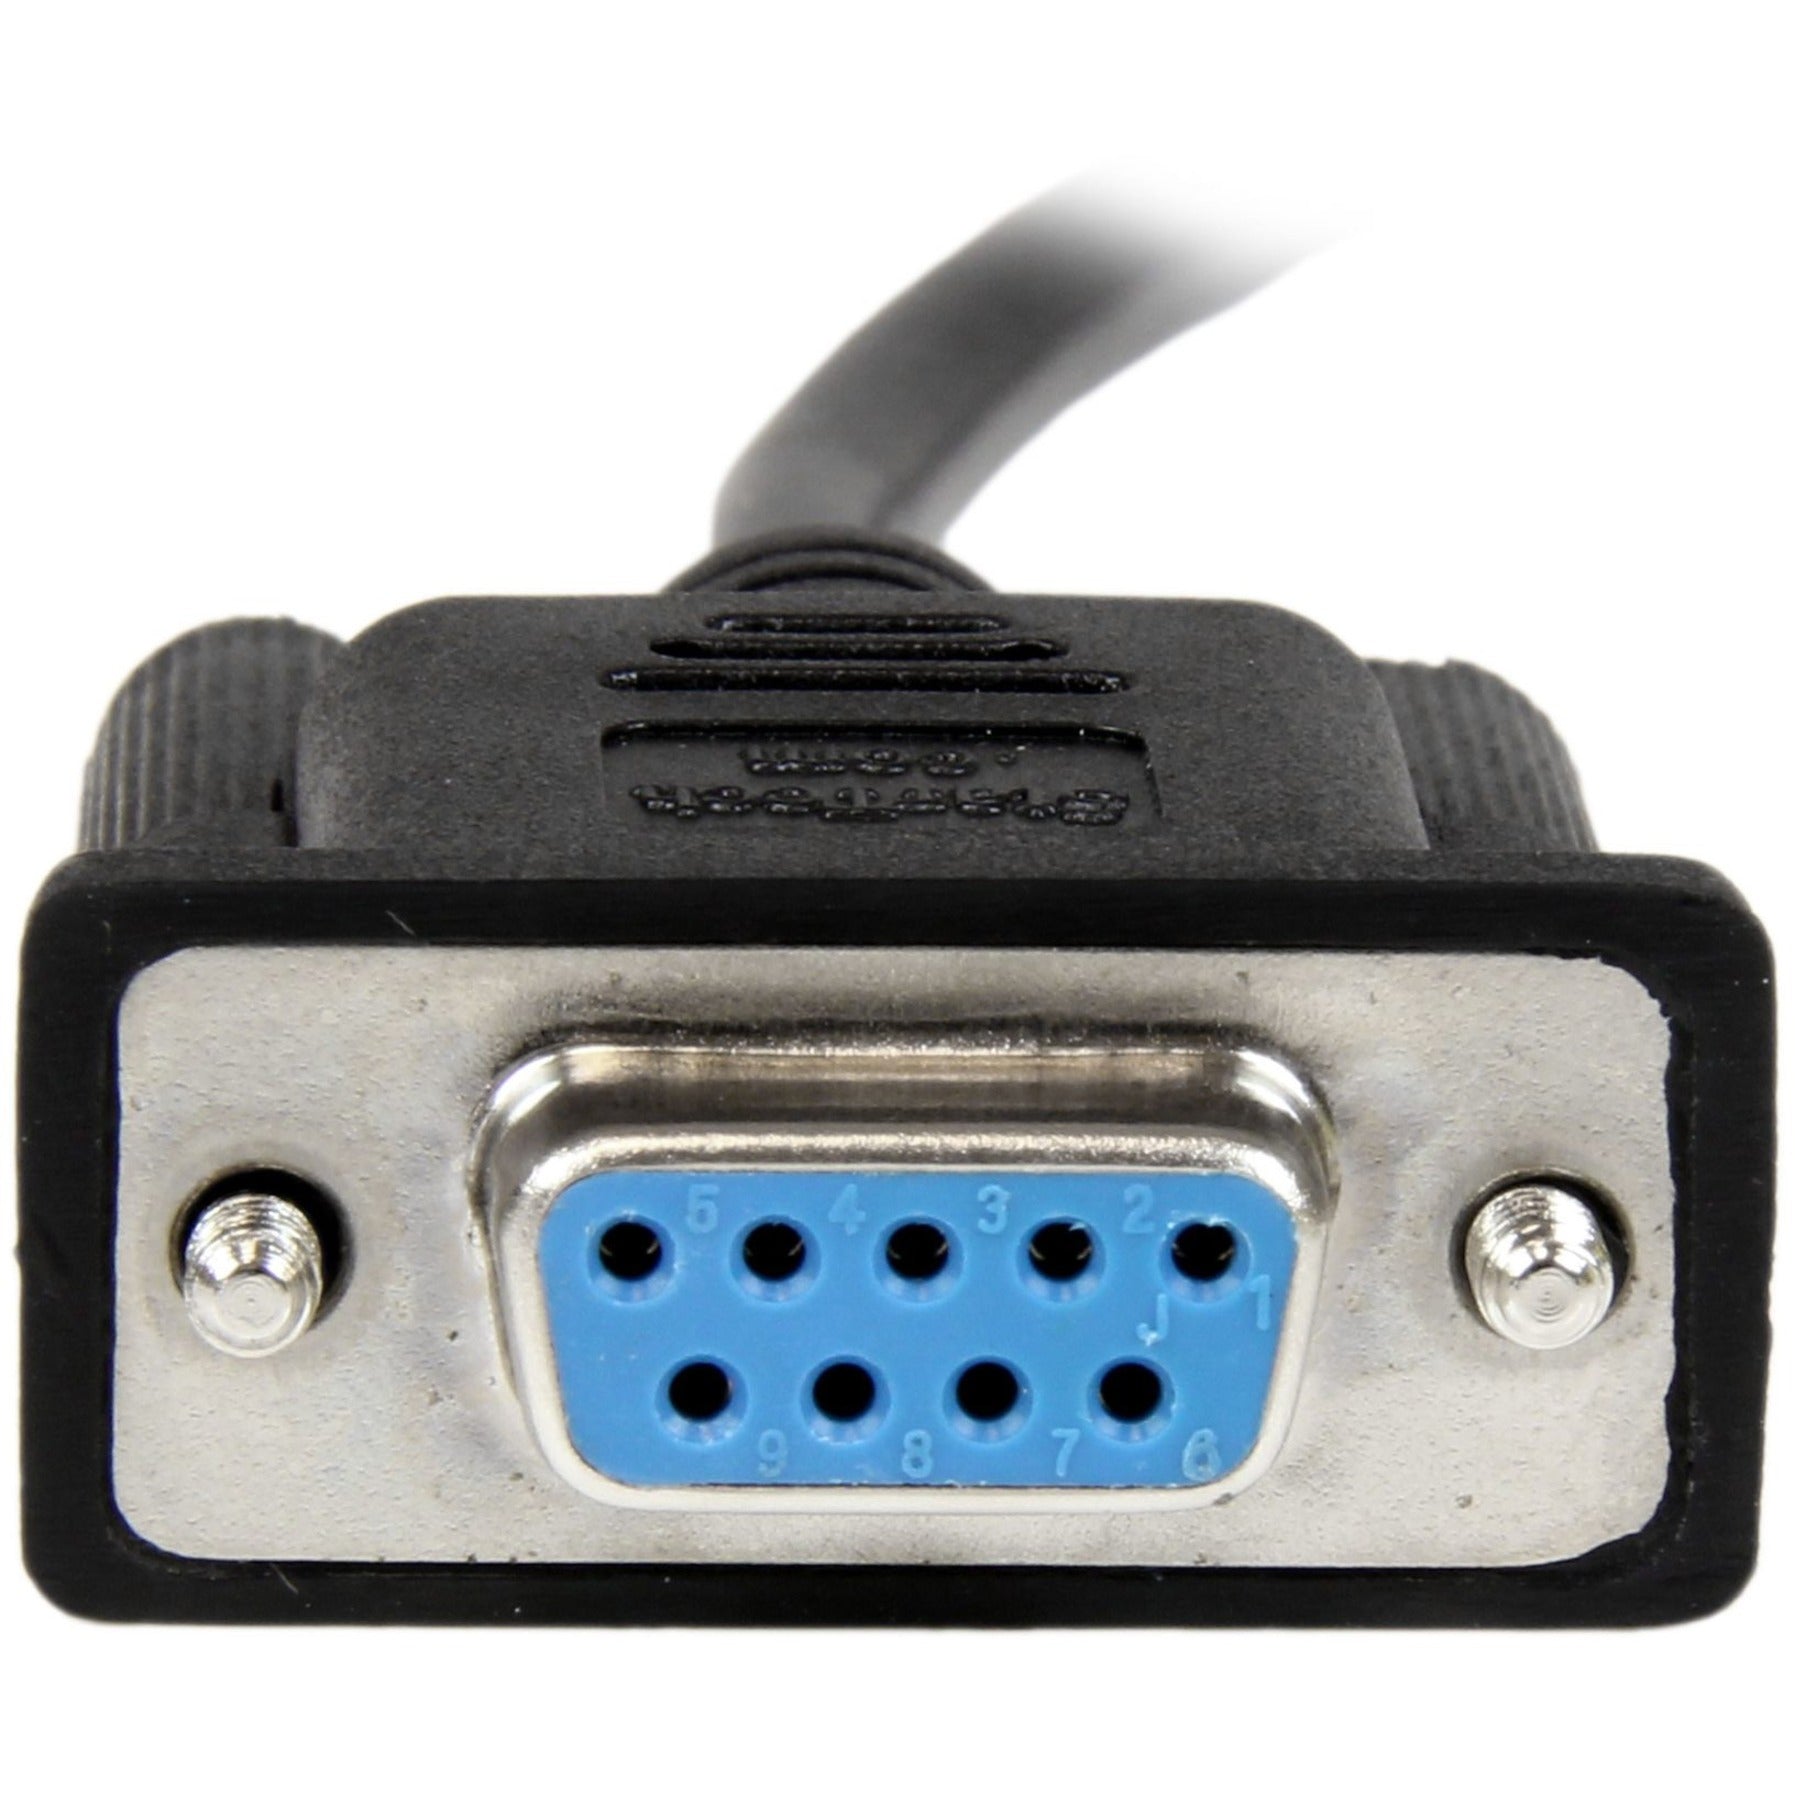 StarTech.com SCNM9FF2MBK 2m Black DB9 RS232 Serial Null Modem Cable F/F, Molded, EMI Protection, Strain Relief